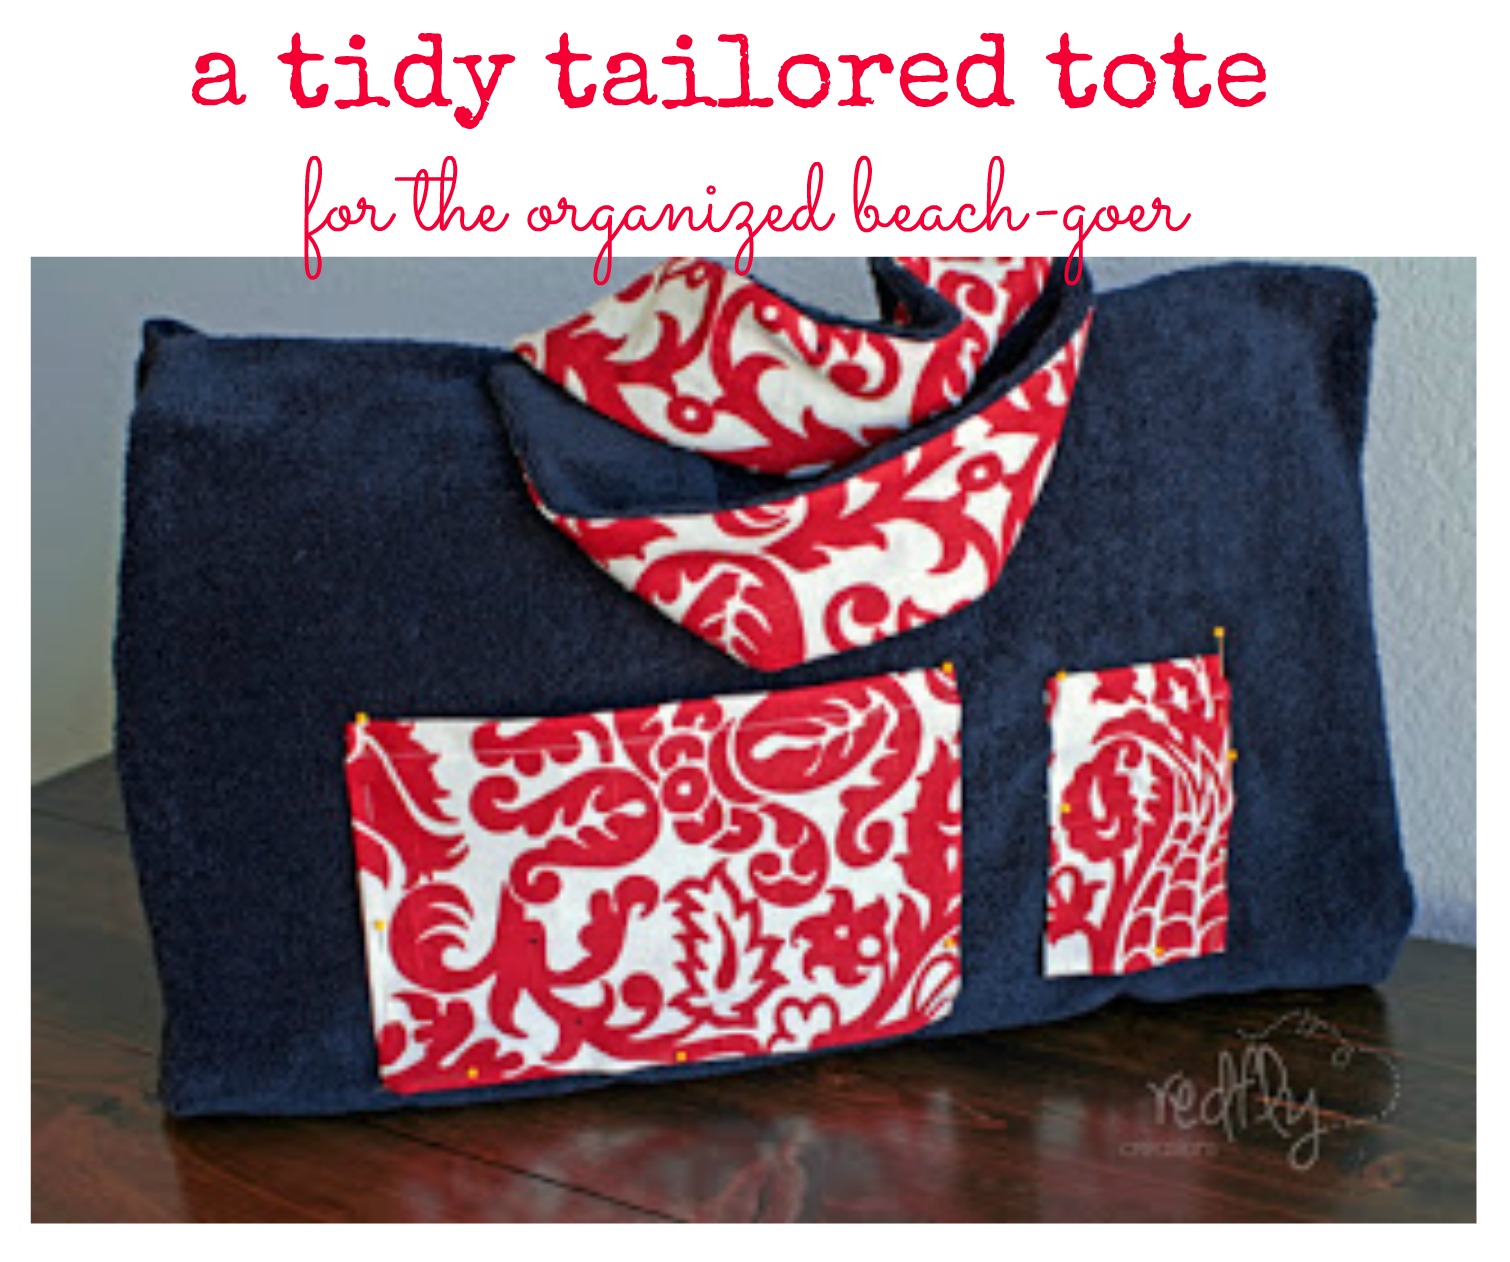 coolest beach towel / tote round-up ever - My French Twist